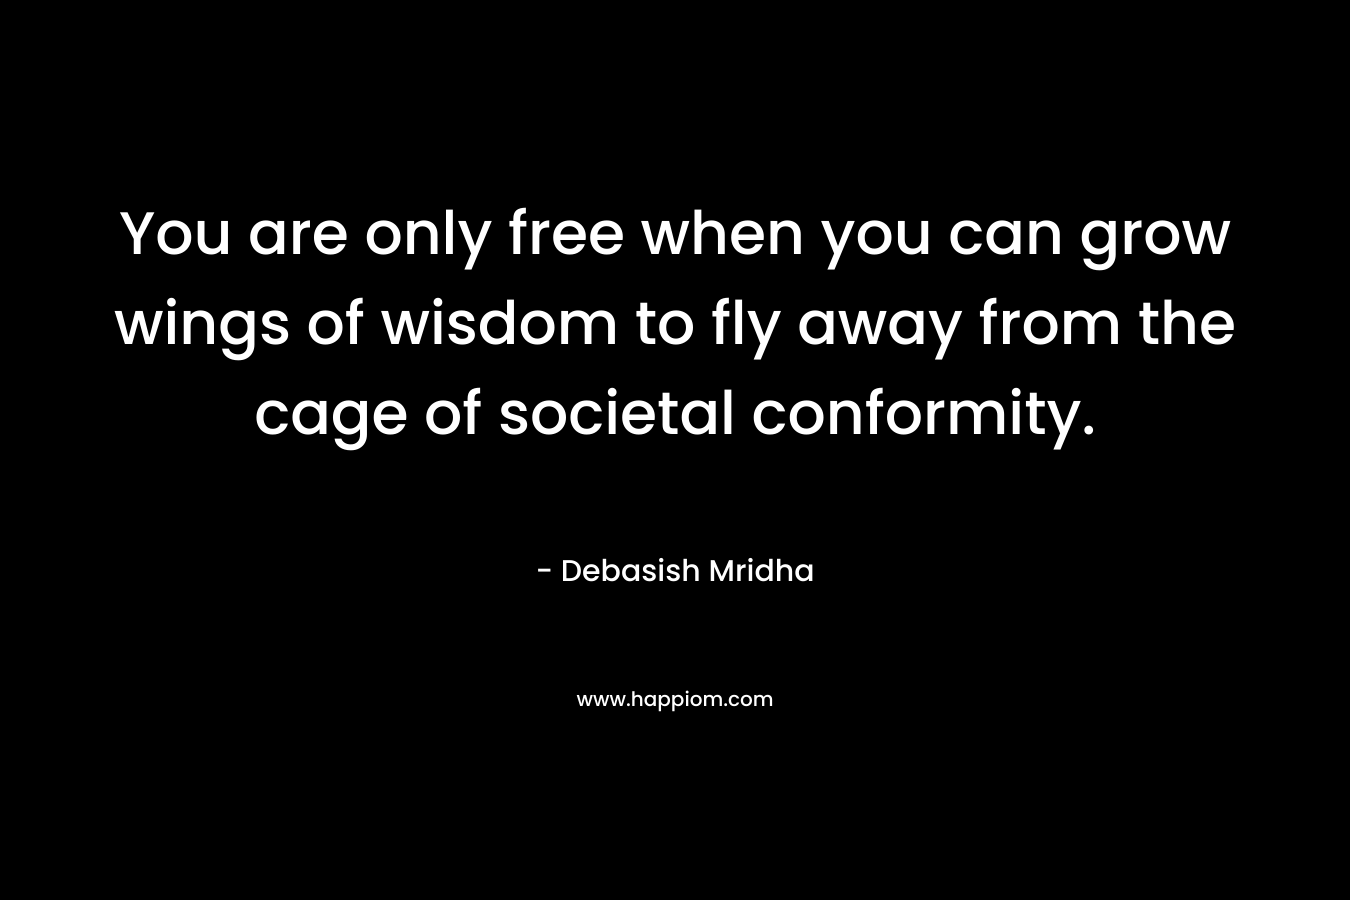 You are only free when you can grow wings of wisdom to fly away from the cage of societal conformity. – Debasish Mridha